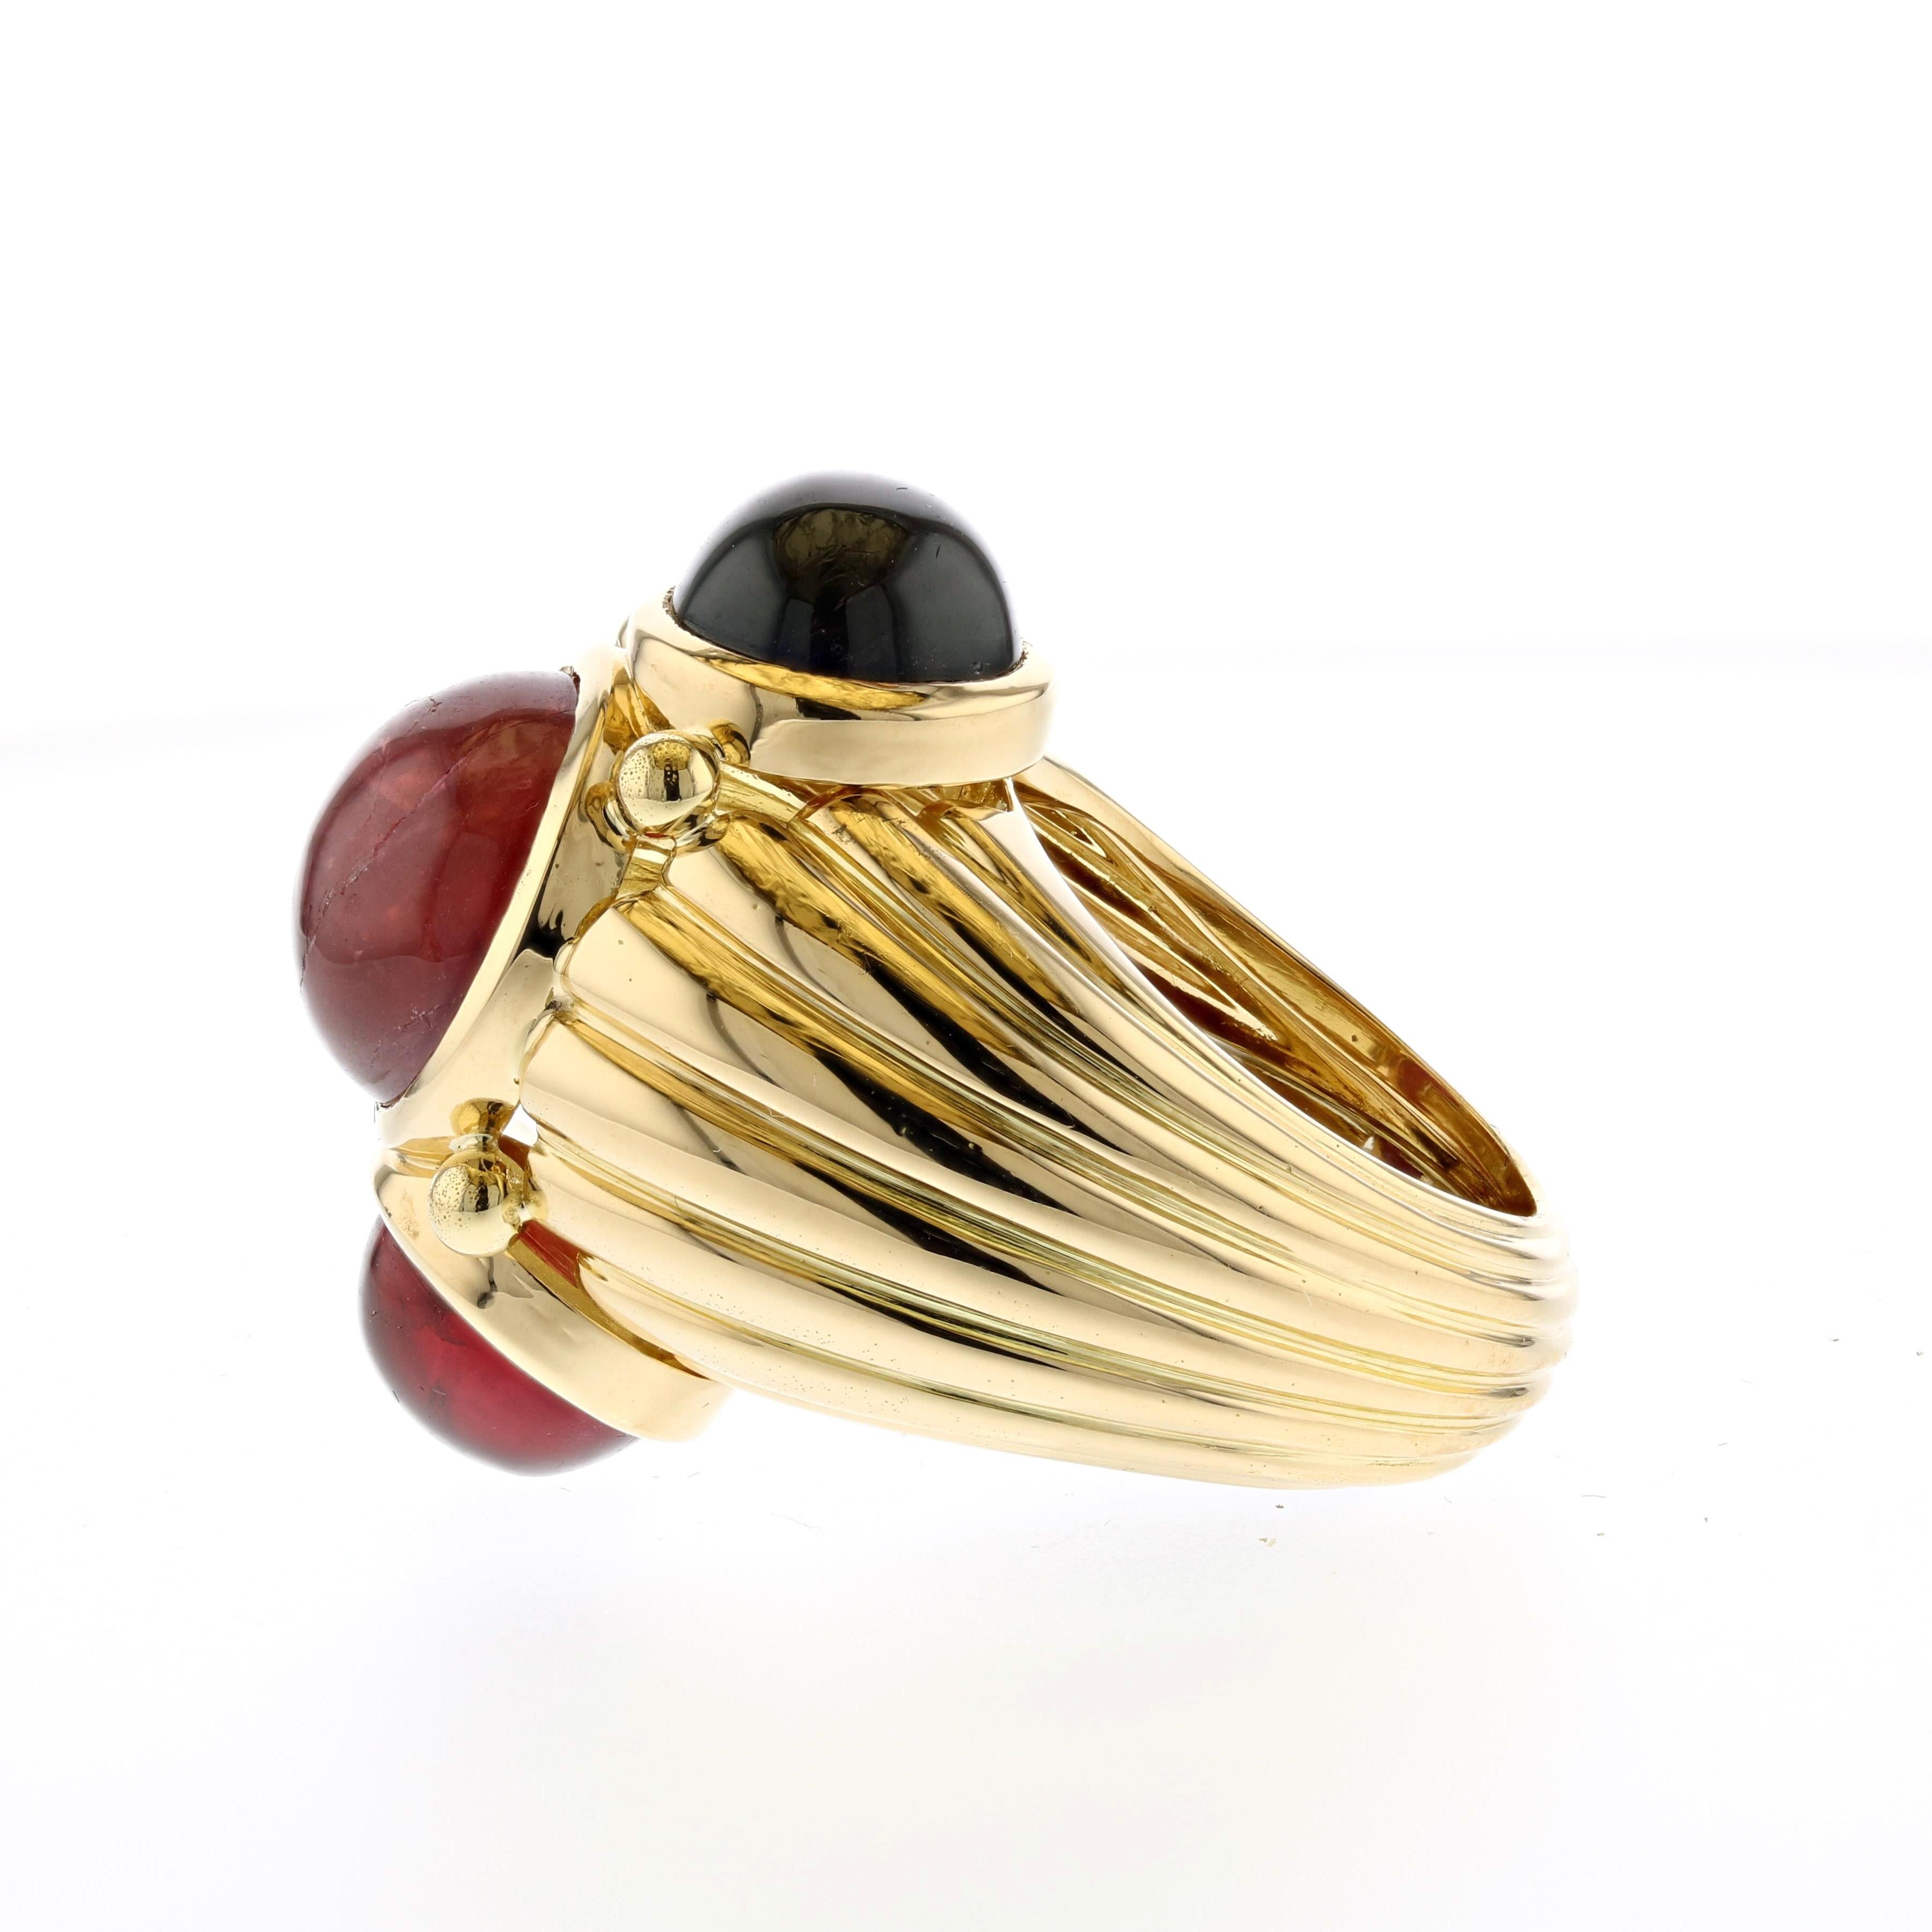 18K yellow gold ring by David Webb.  The center stone is a cabochon ruby weighing 8 carats.  The two cabochon garnets have a combined weight of 10 carats.  Presentation area measures 7/8 of an inch by 1 inch, and stands 5/8 inches off the finger. 